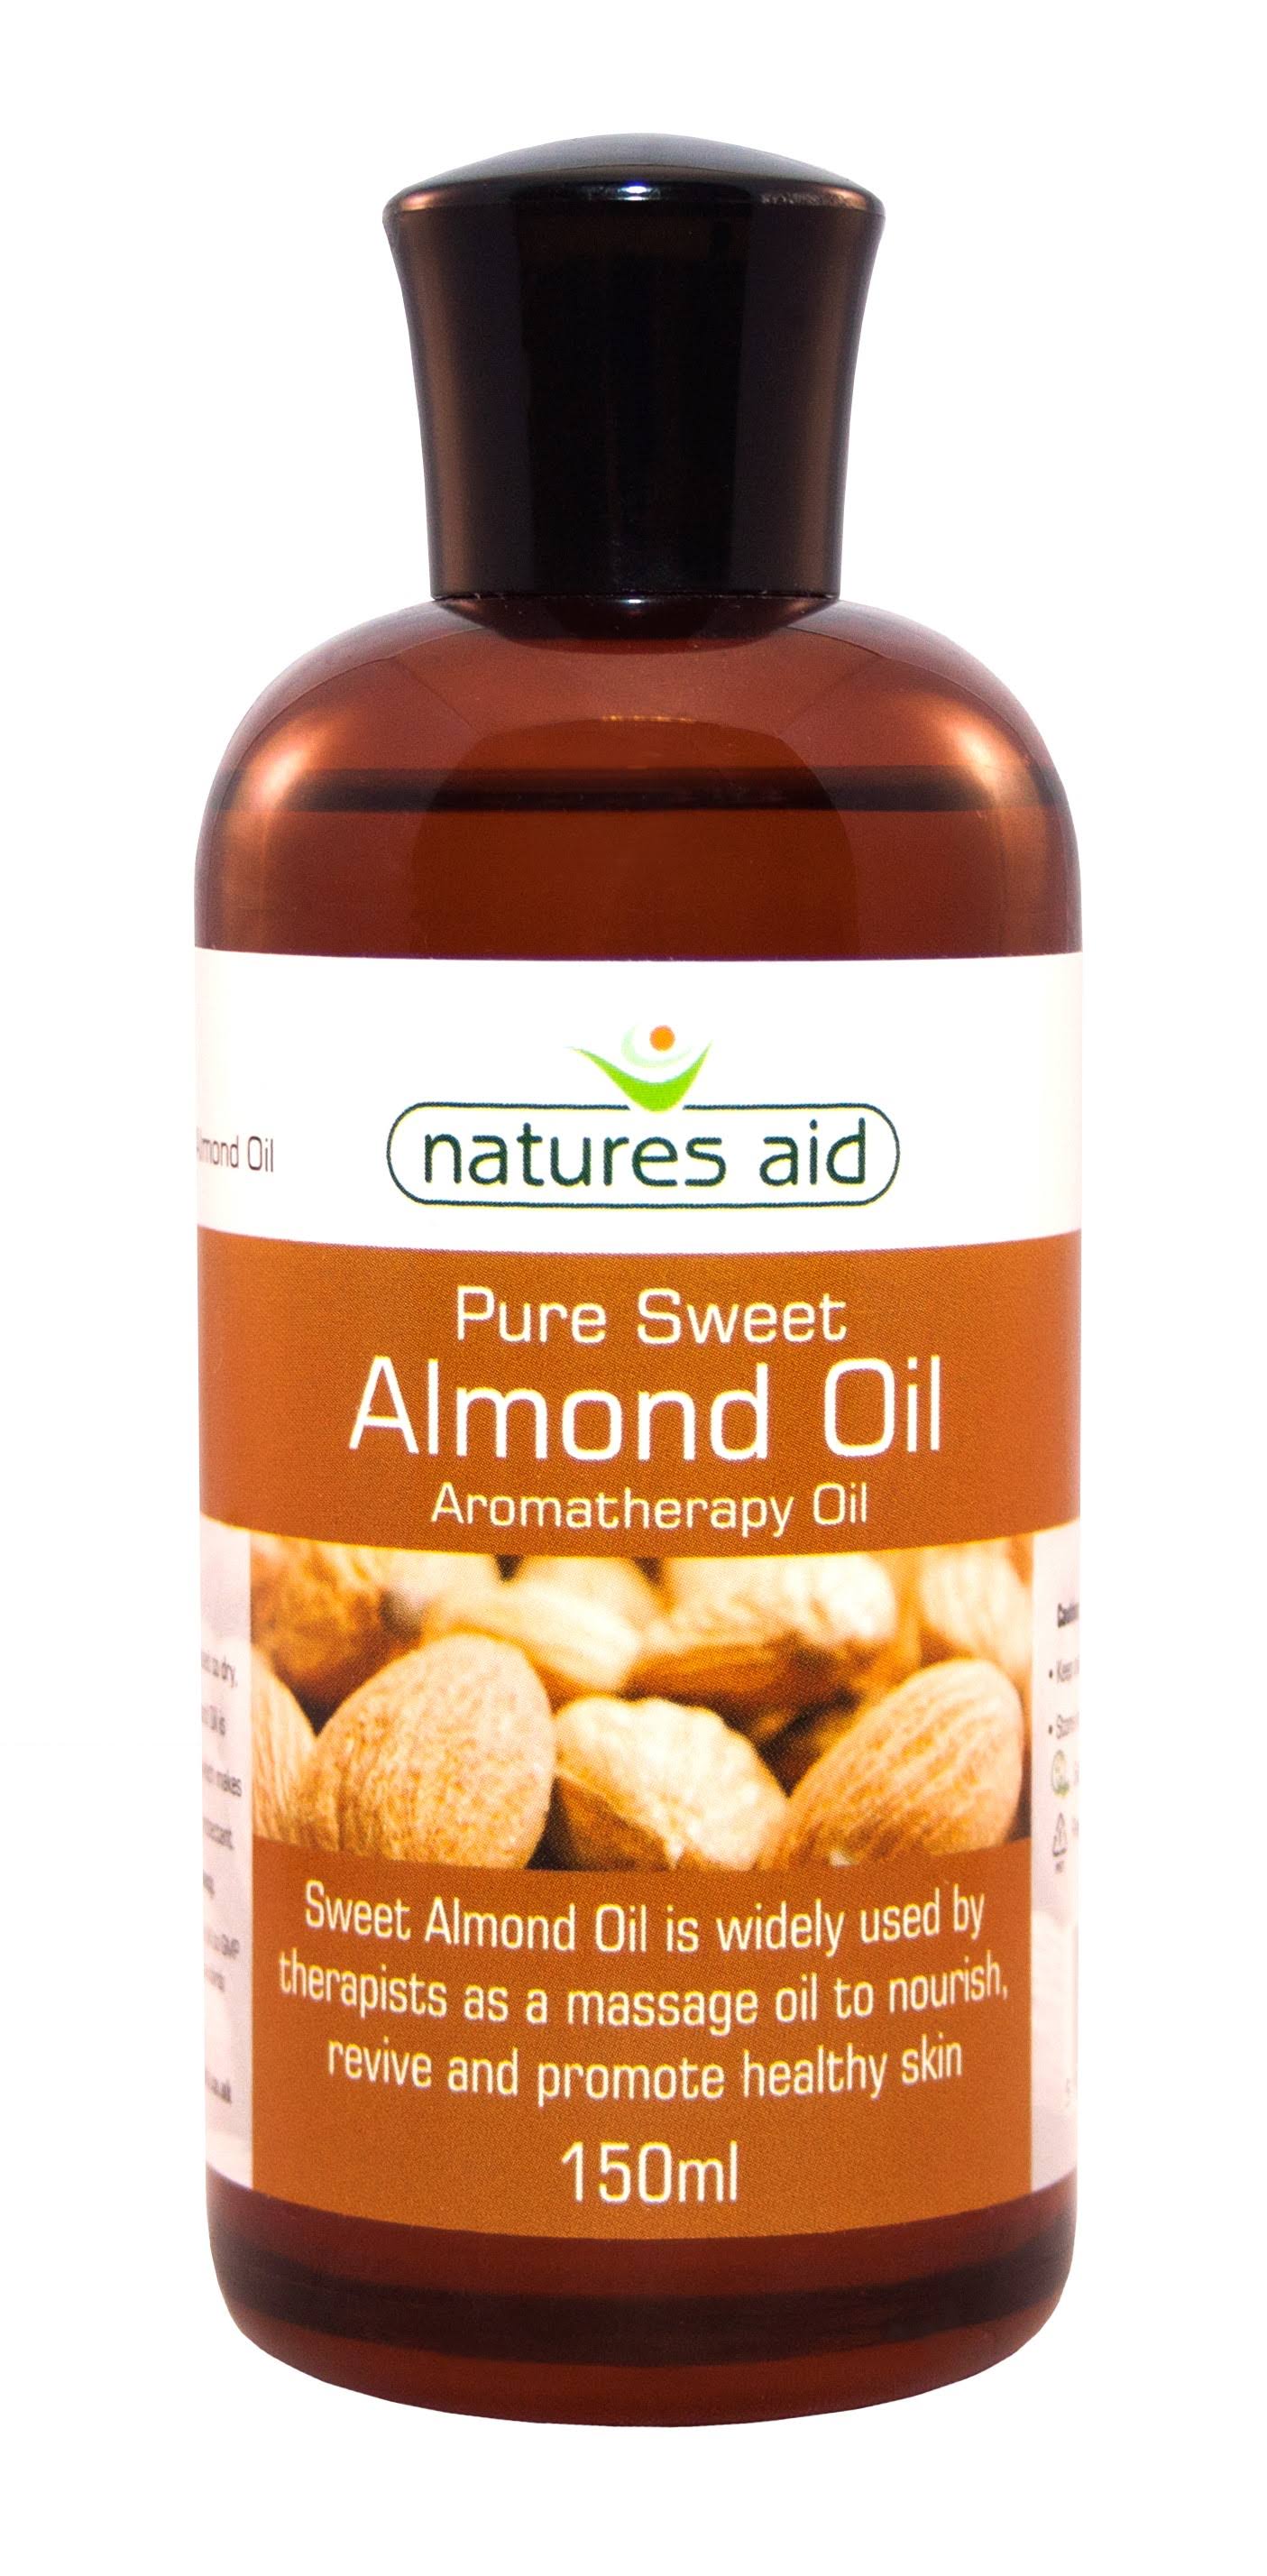 Natures Aid Almond Oil - 150ml